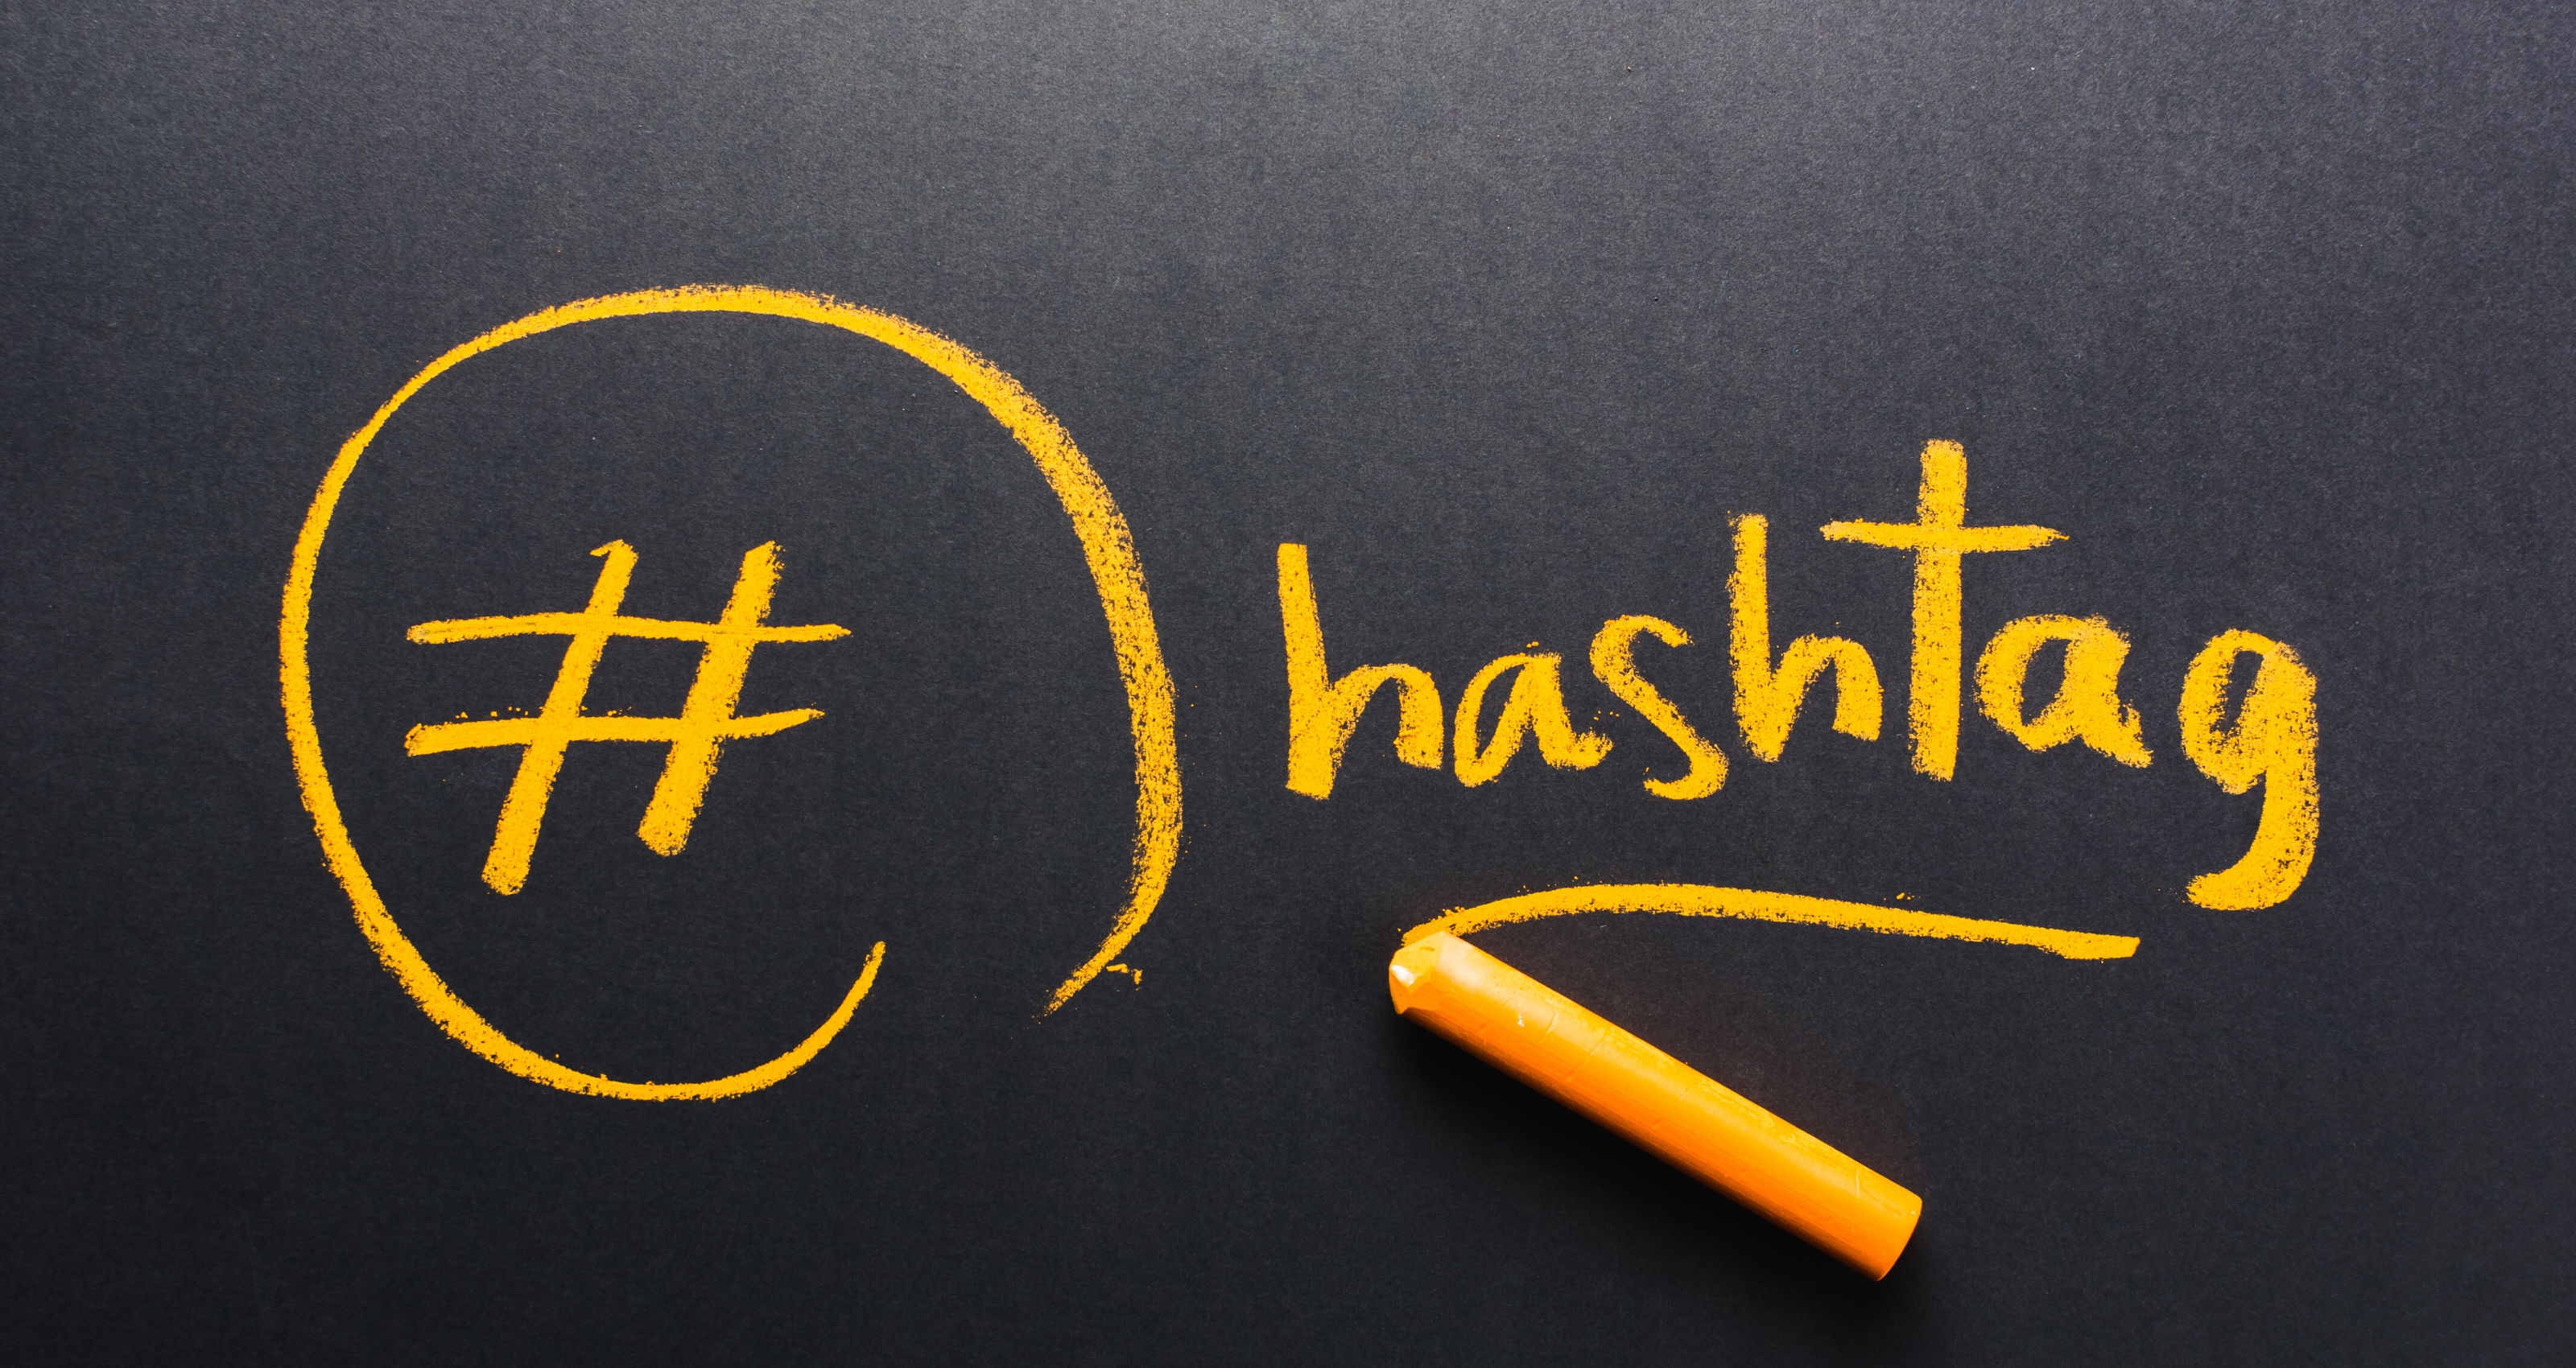 Daily Hashtags for Small Business Marketing